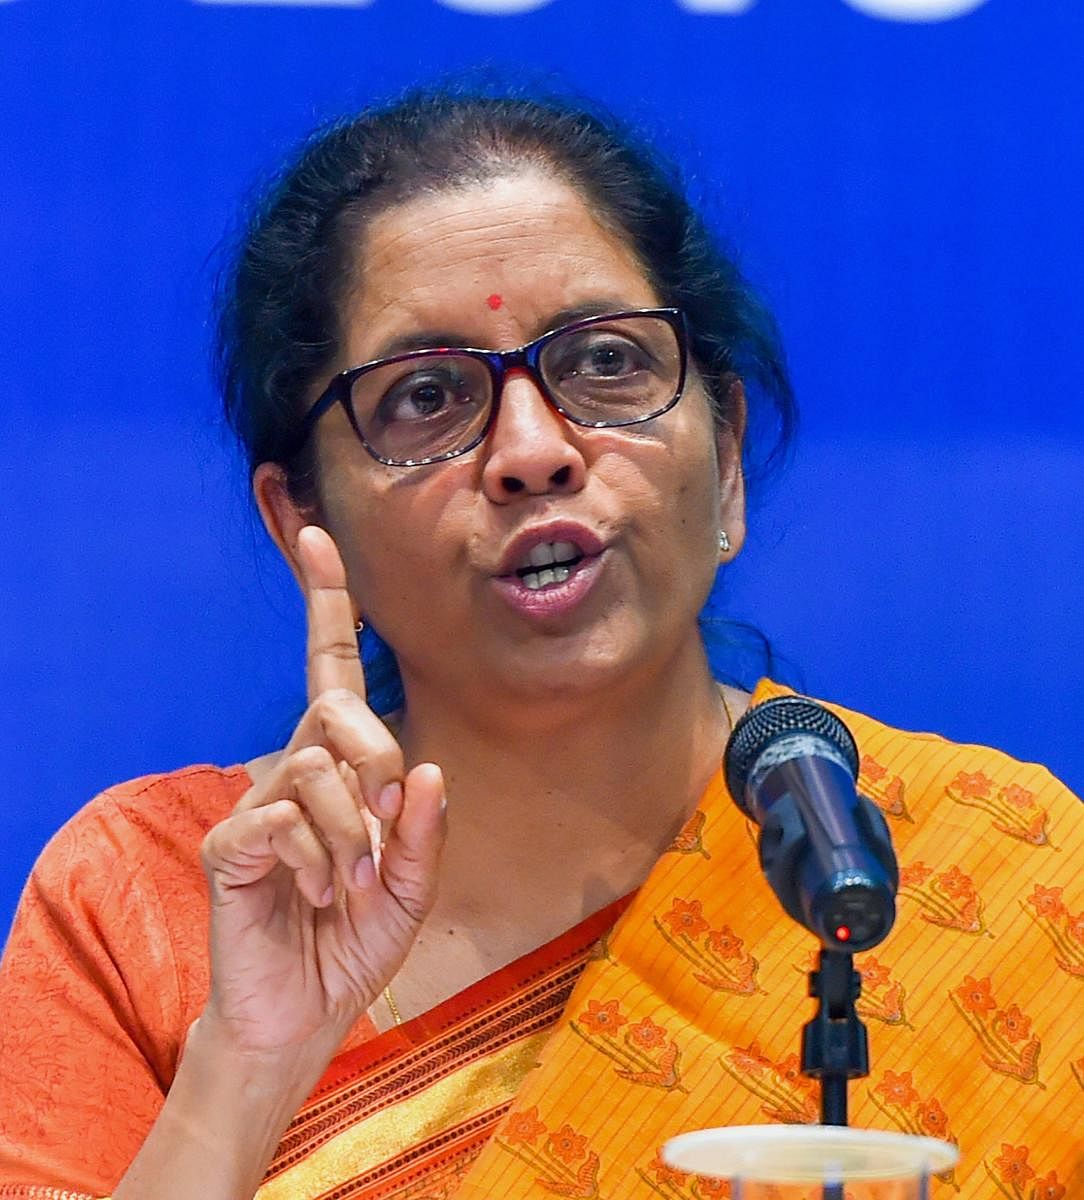 The Congress chief must come out and tell very clearly what he meant when he said that the Congress was a Muslim party, senior BJP leader Nirmala Sitharaman told reporters here at a press conference. PTI file photo.